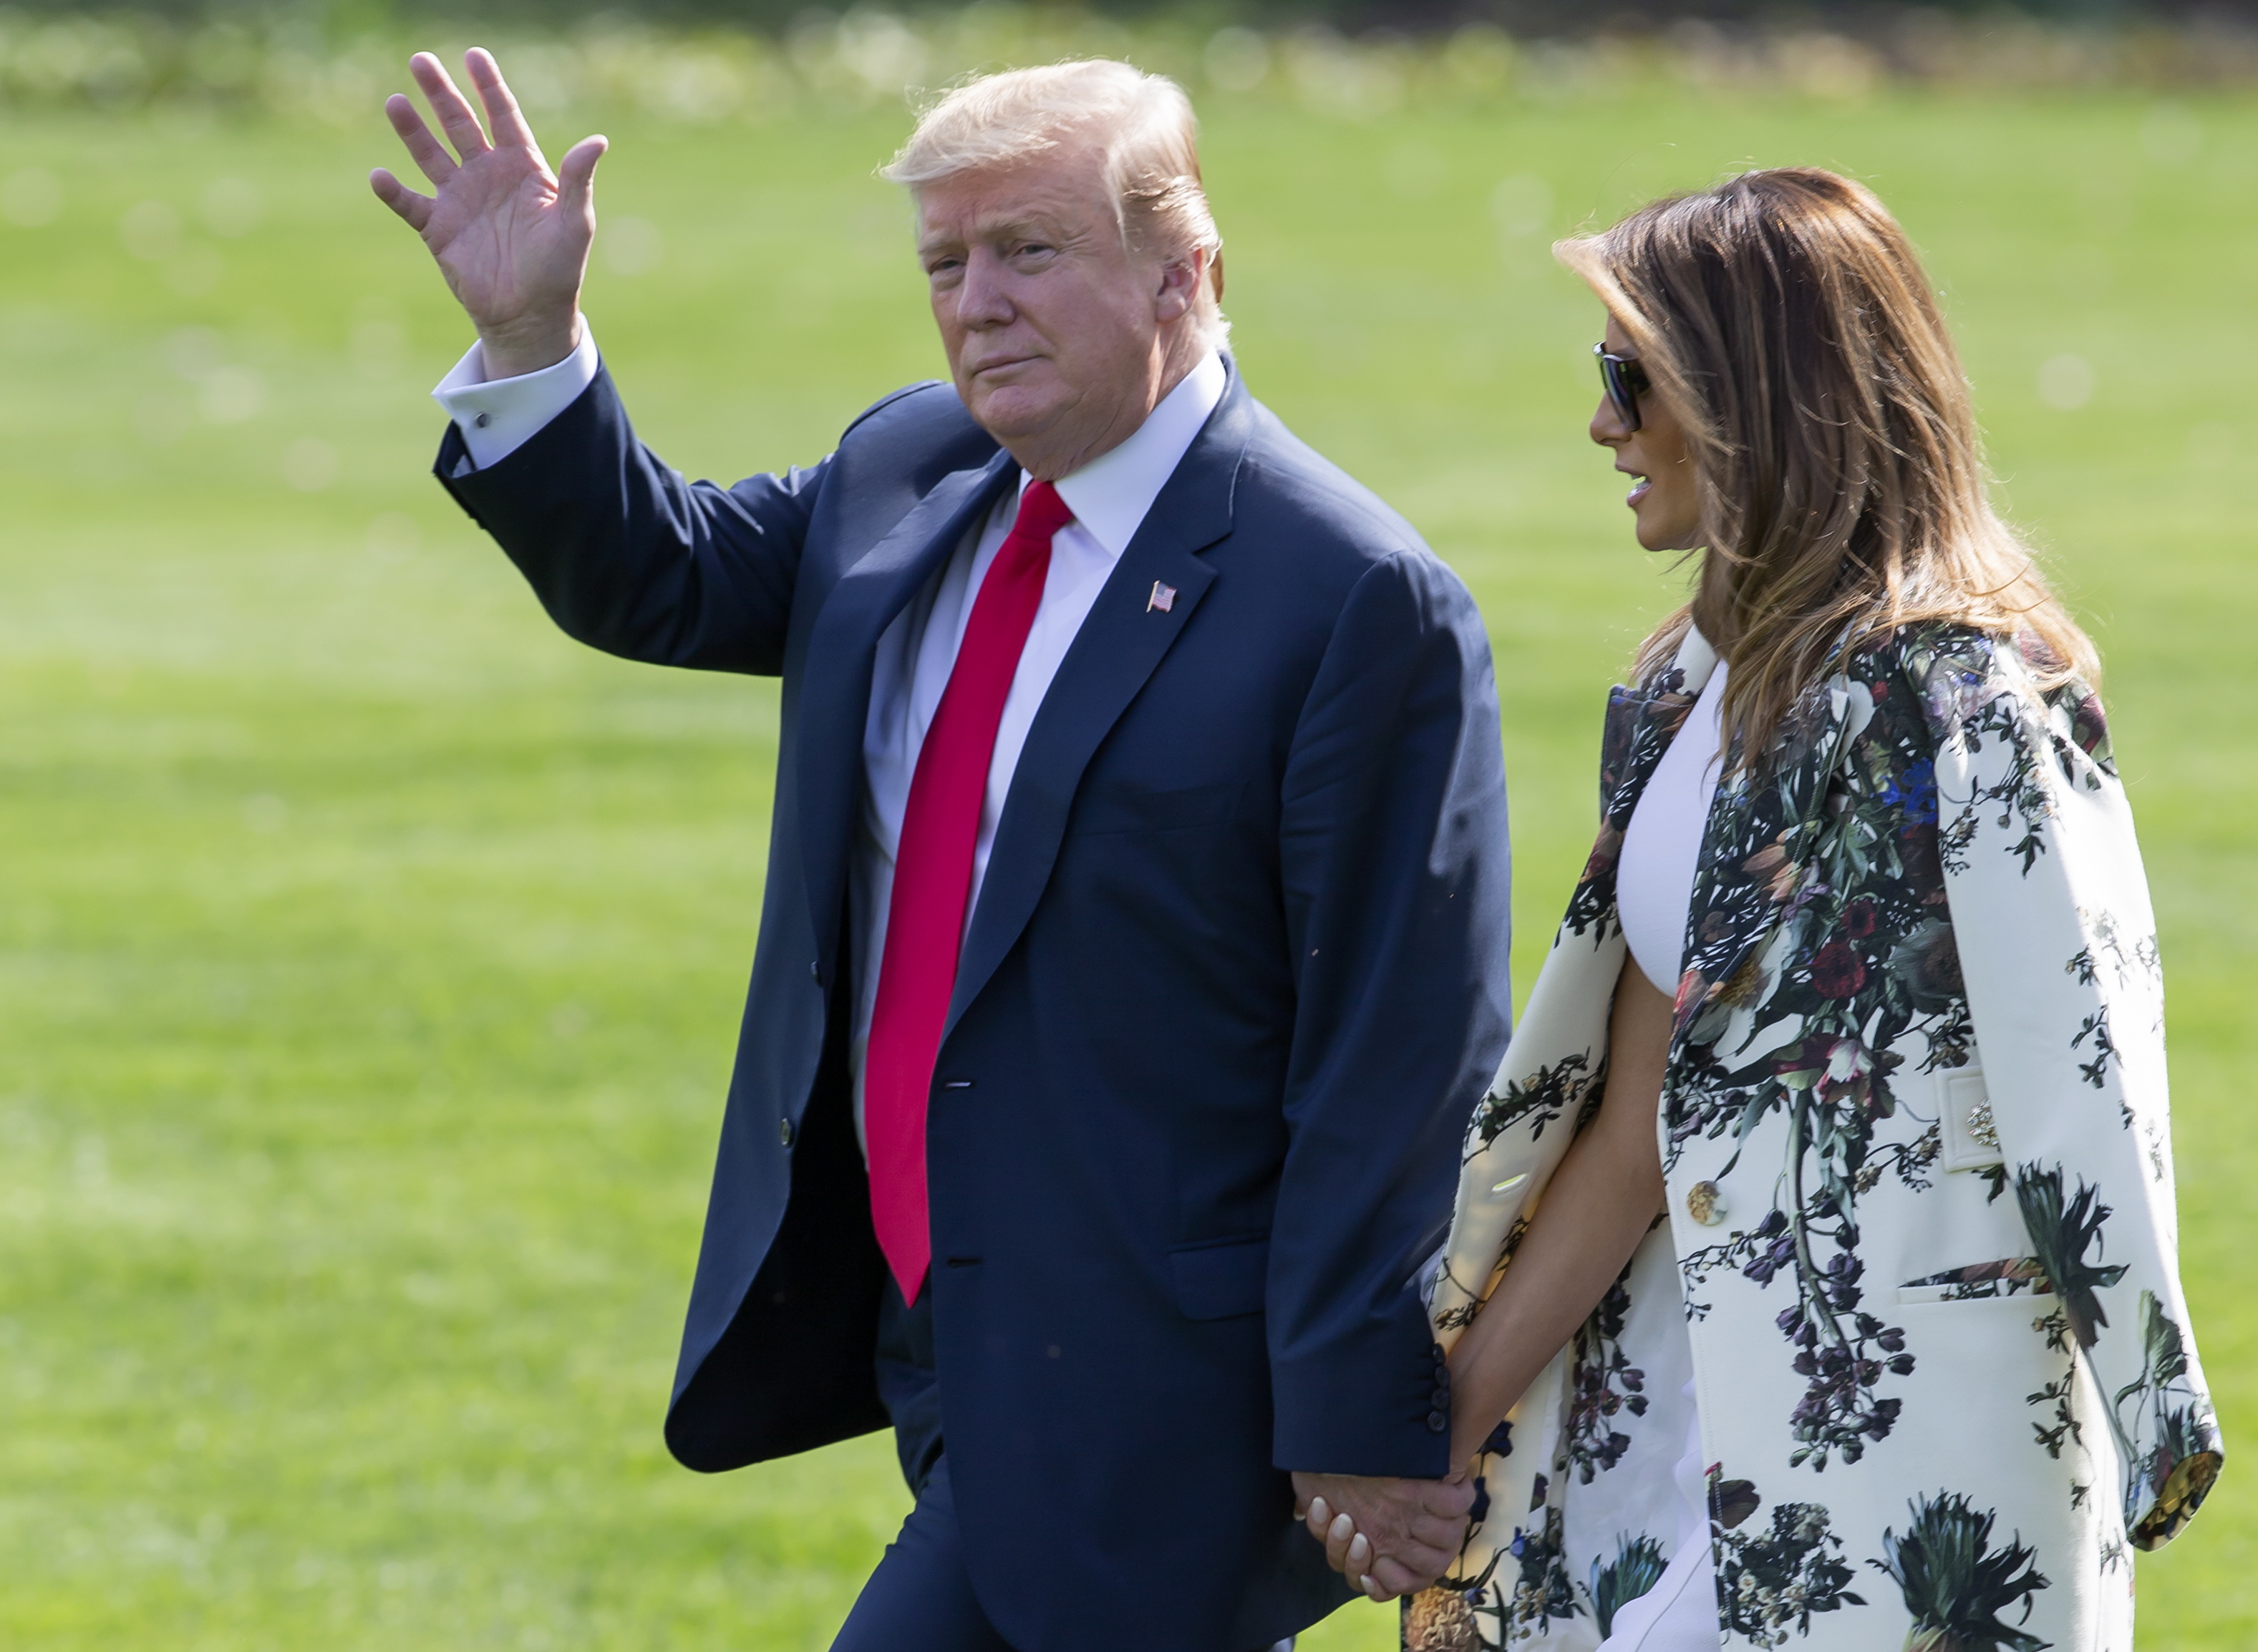 epa07514881 US President Donald J. Trump (L) and First Lady Melania Trump (R) walk on the South Lawn of the White House to Marine One in Washington, DC, USA, 18 April 2019. Trump was leaving to spend the long Easter Weekend at his Mar-a-Lago Club in Palm Beach, Florida. Trump did not stop to speak with the media, after a redacted version of Special Counsel Robert Mueller's report on Russian interference in the 2016 election was released earlier in the day.  EPA/ERIK S. LESSER